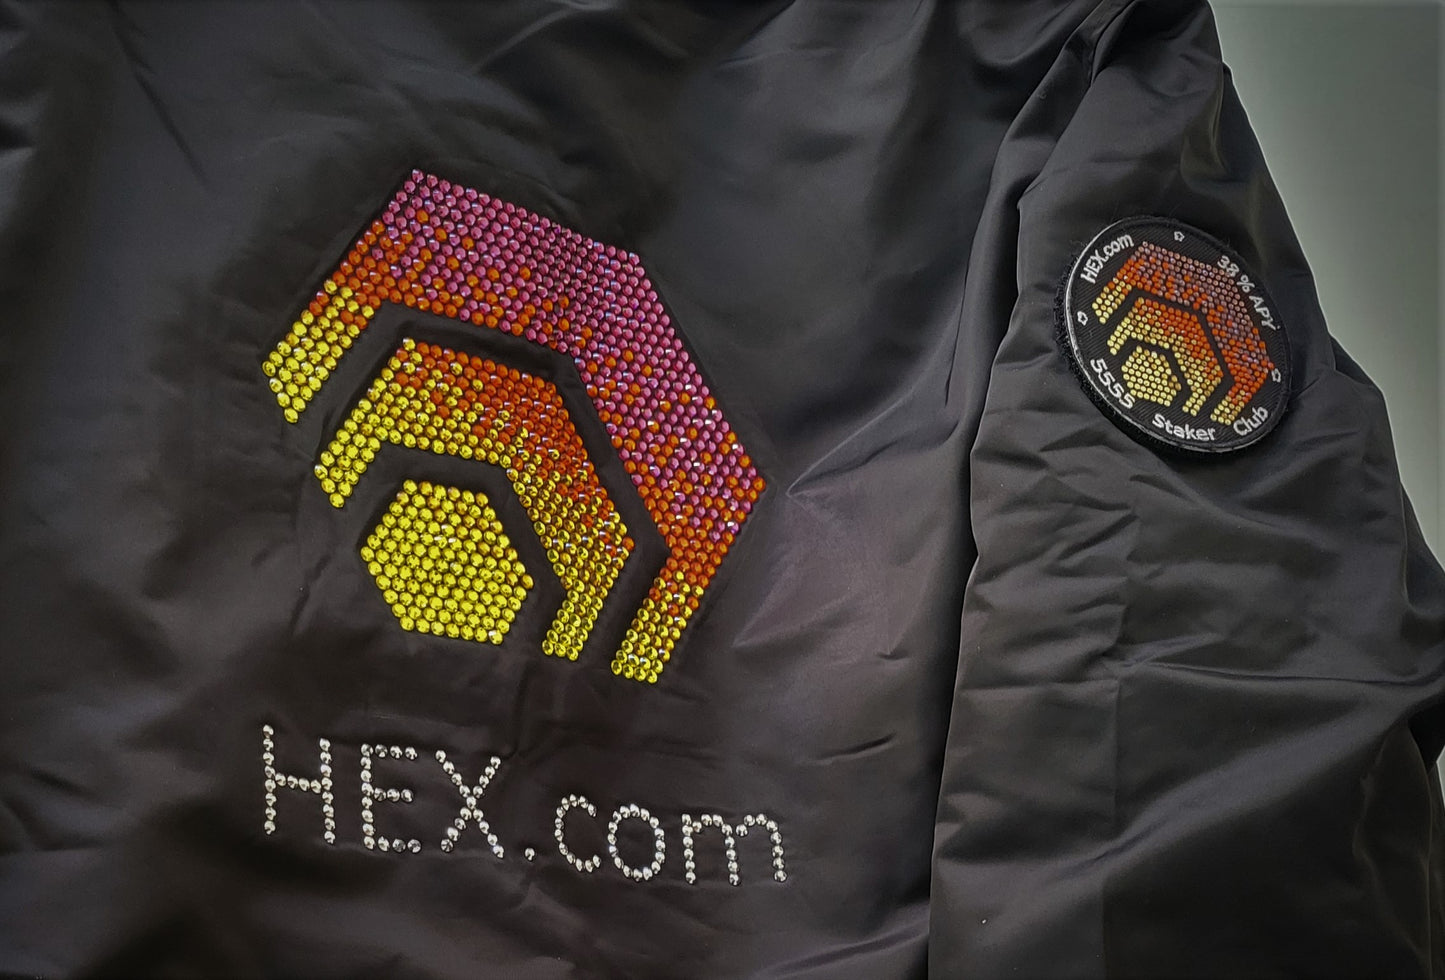 M2thaK tribute HEX Bomberjacket limited edition #100